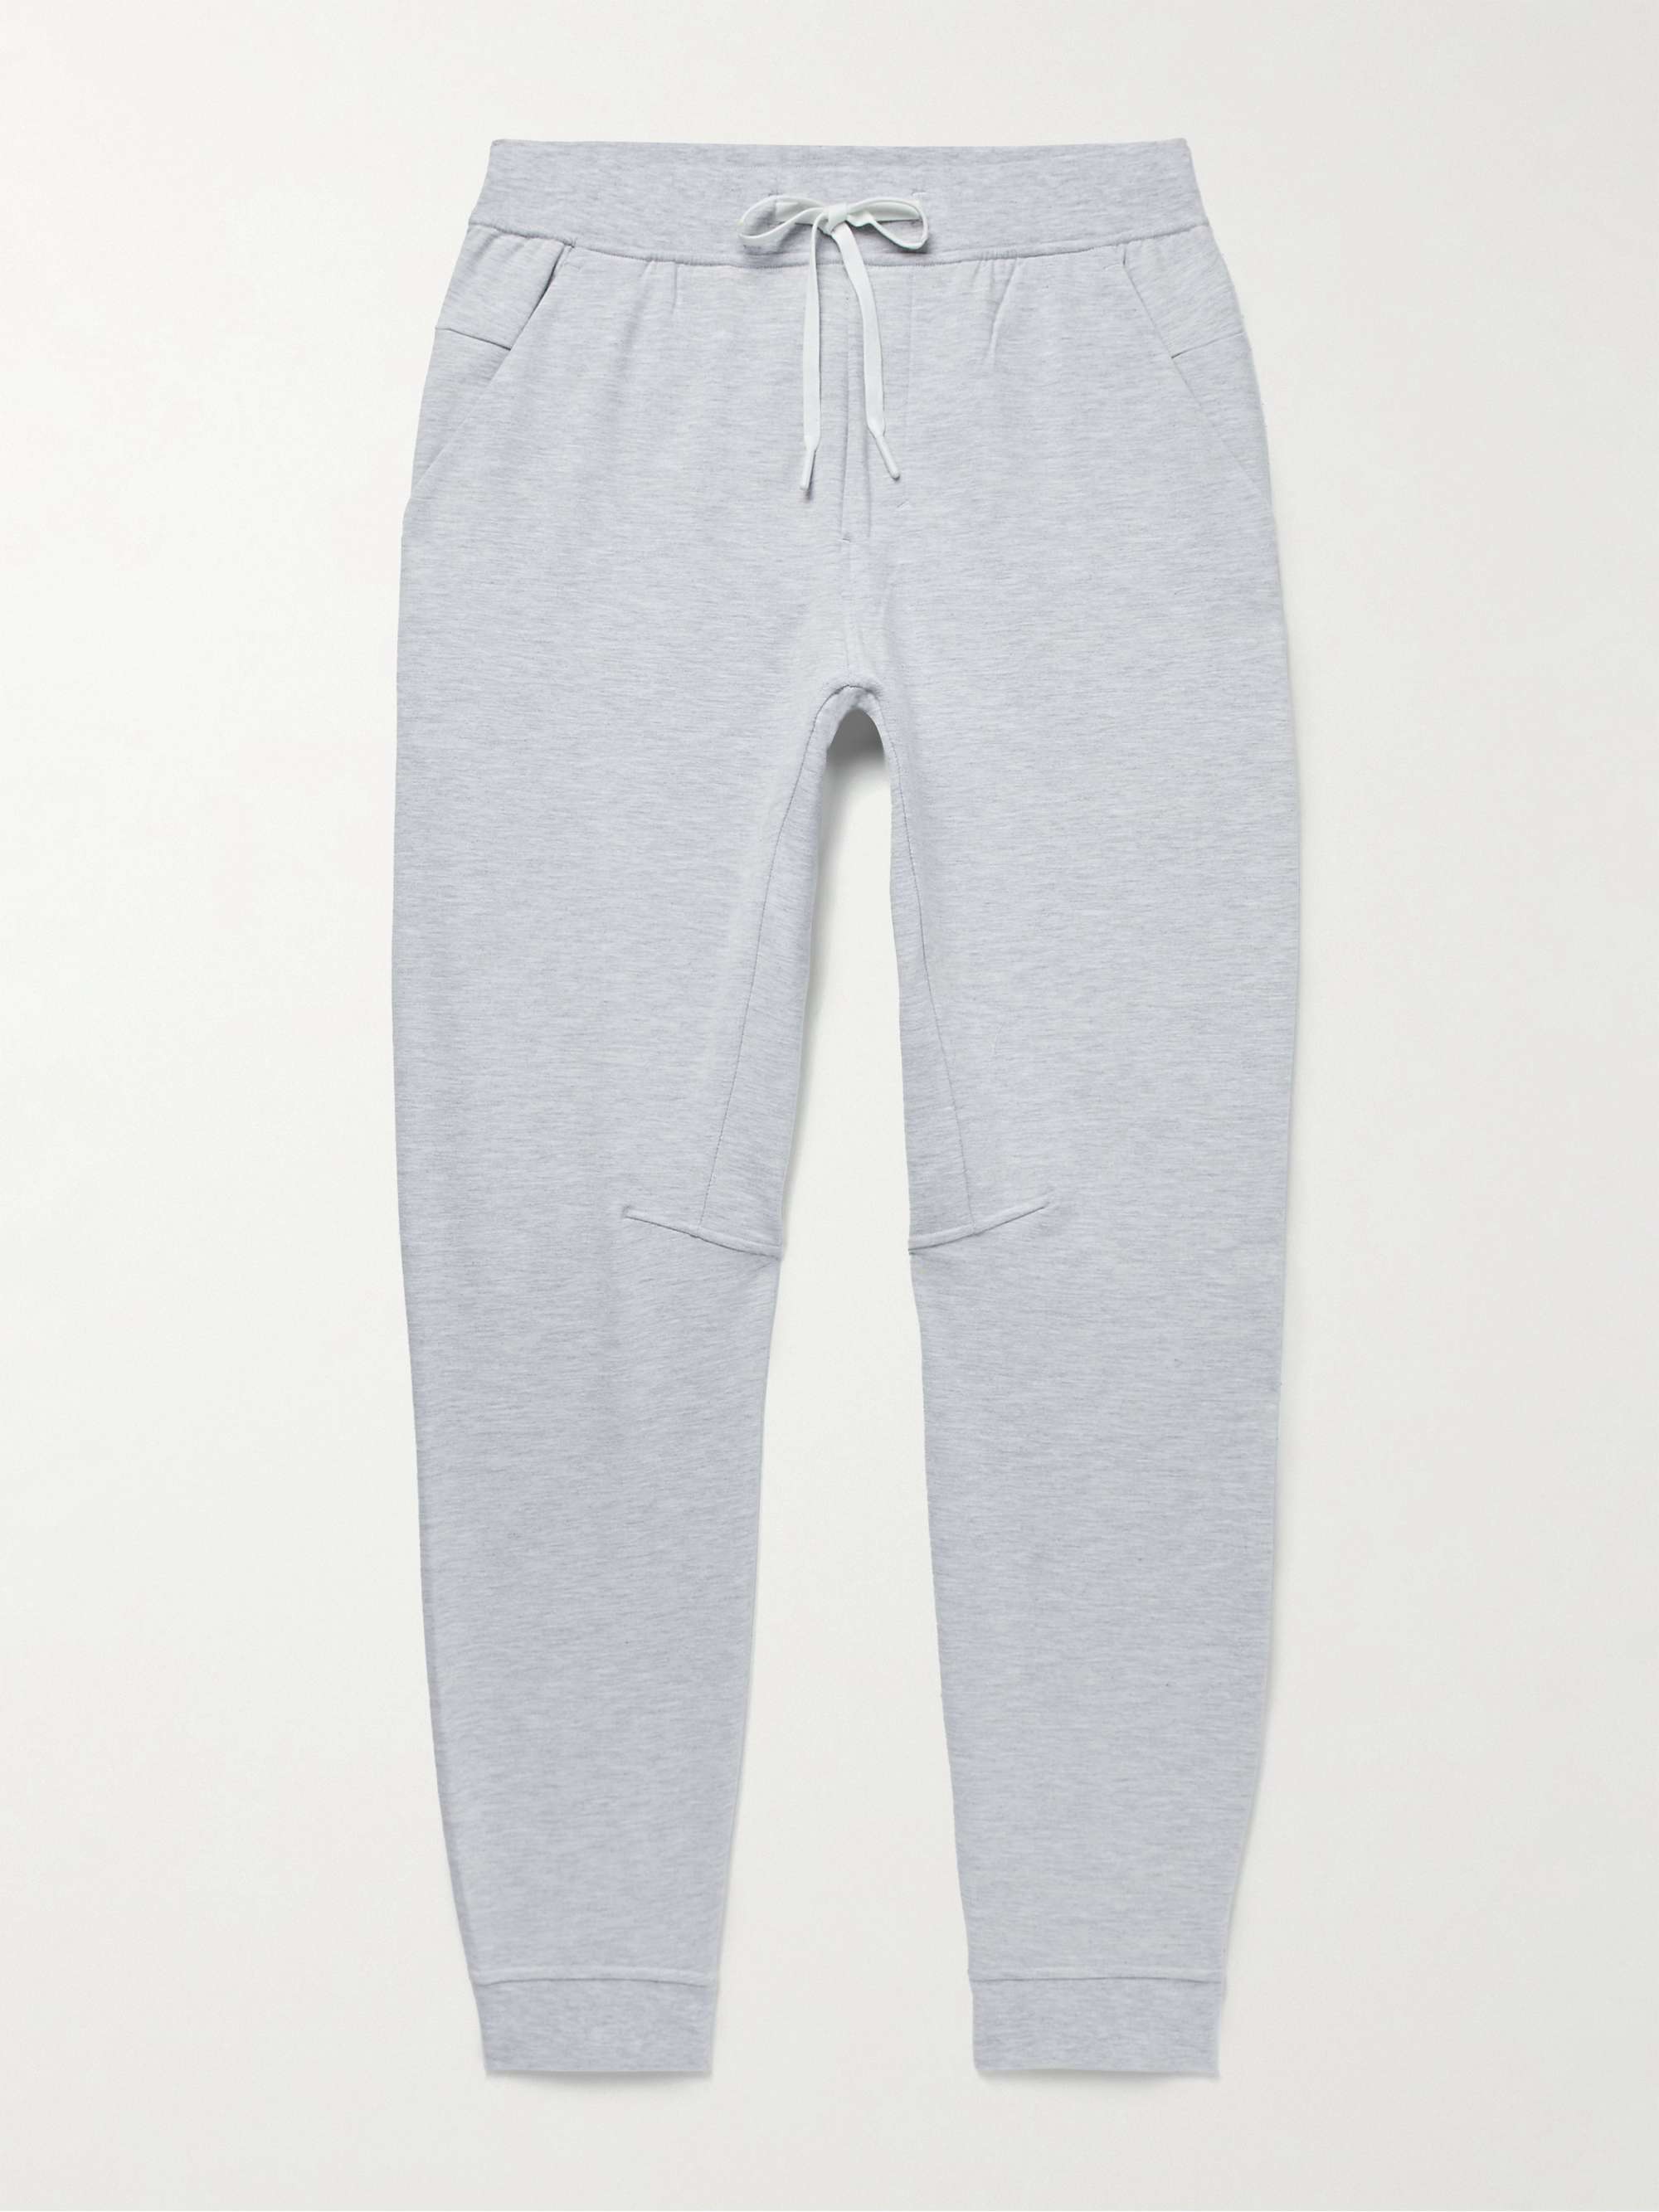 Gray City Sweat Slim-Fit Tapered French Terry Sweatpants | LULULEMON | MR  PORTER